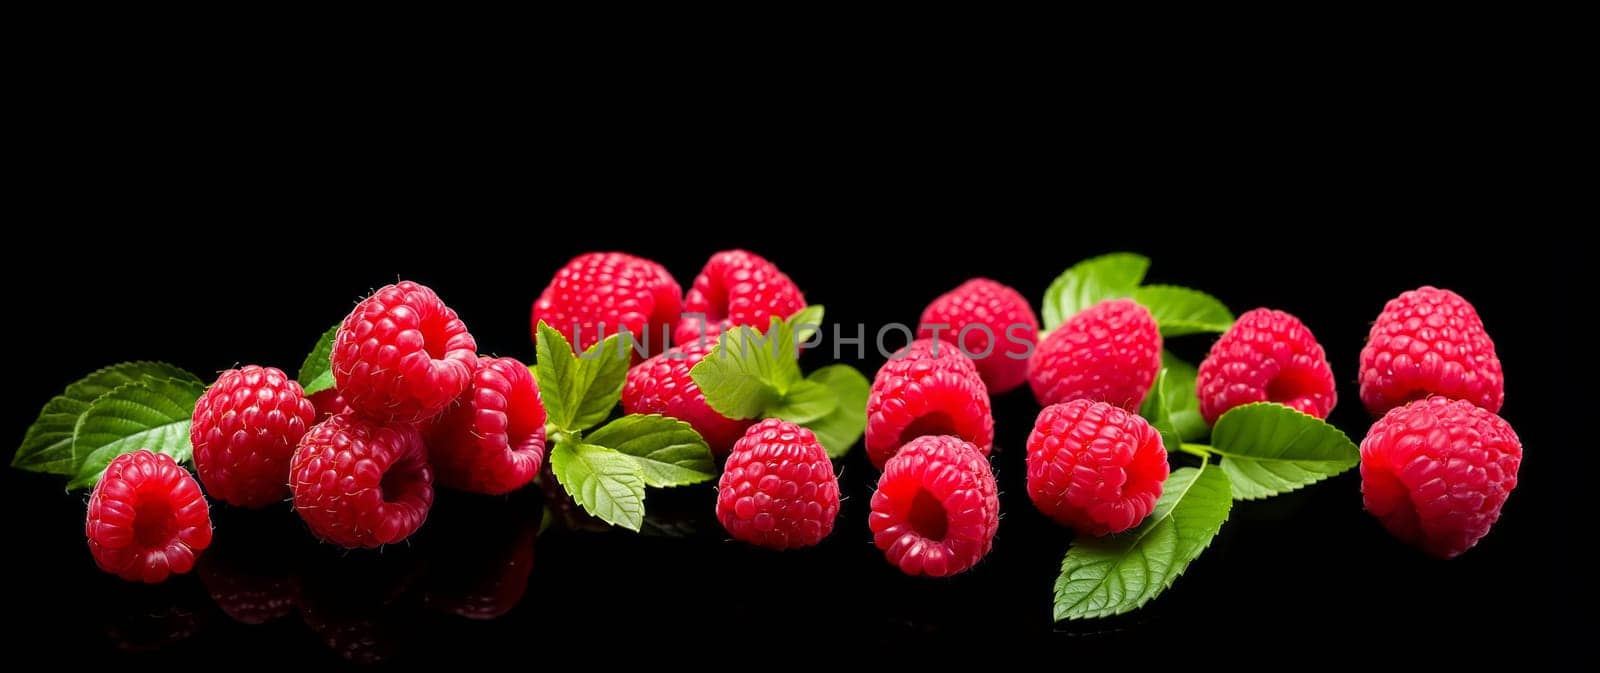 Raspberries with leaves isolated on black background background.